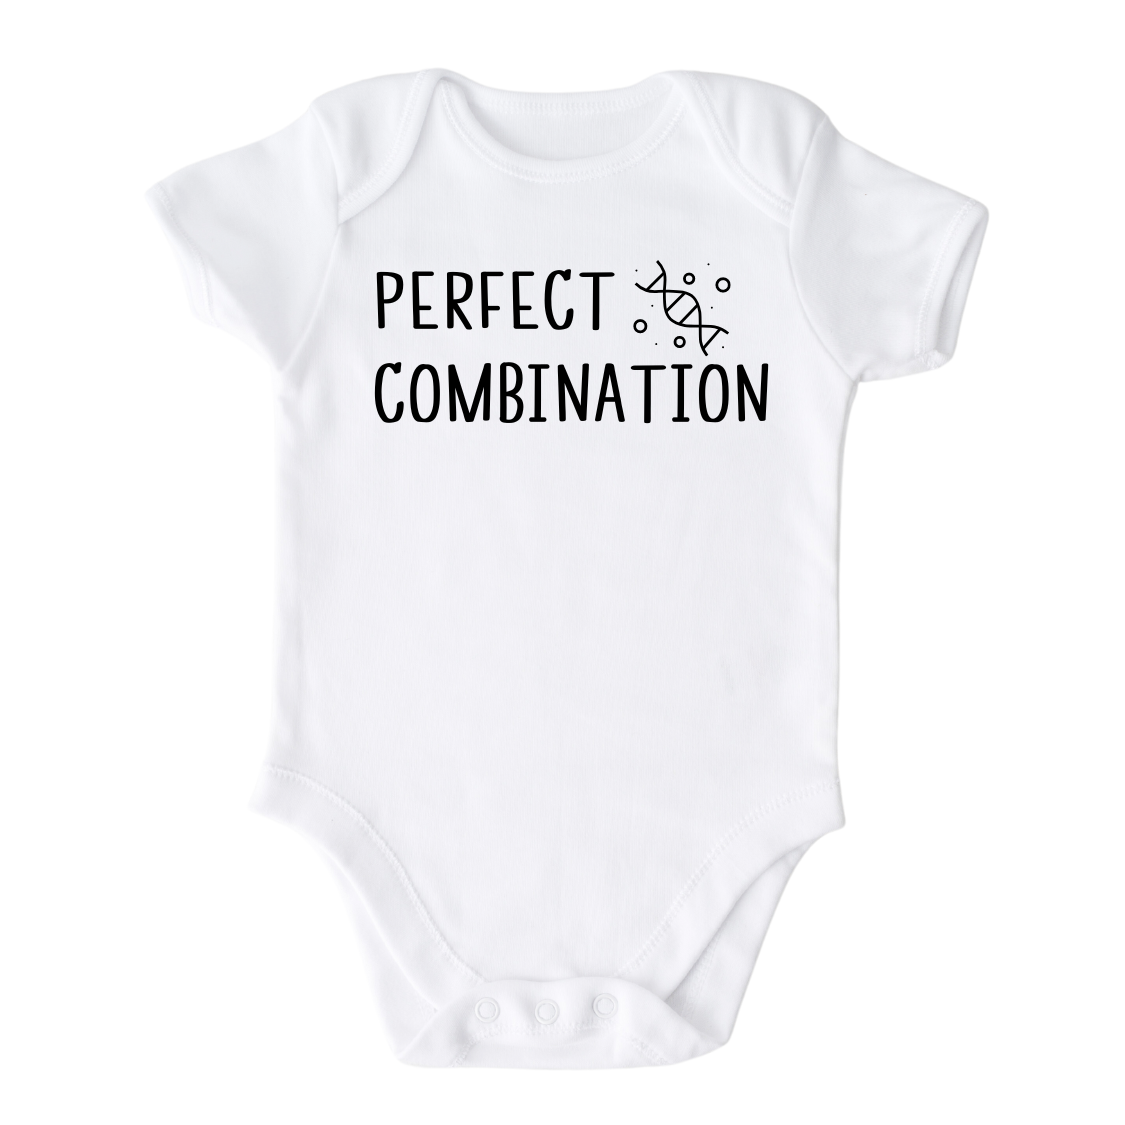 Baby Onesie® Perfect Combination Scientist Baby Infant Clothing for Baby Shower Gift